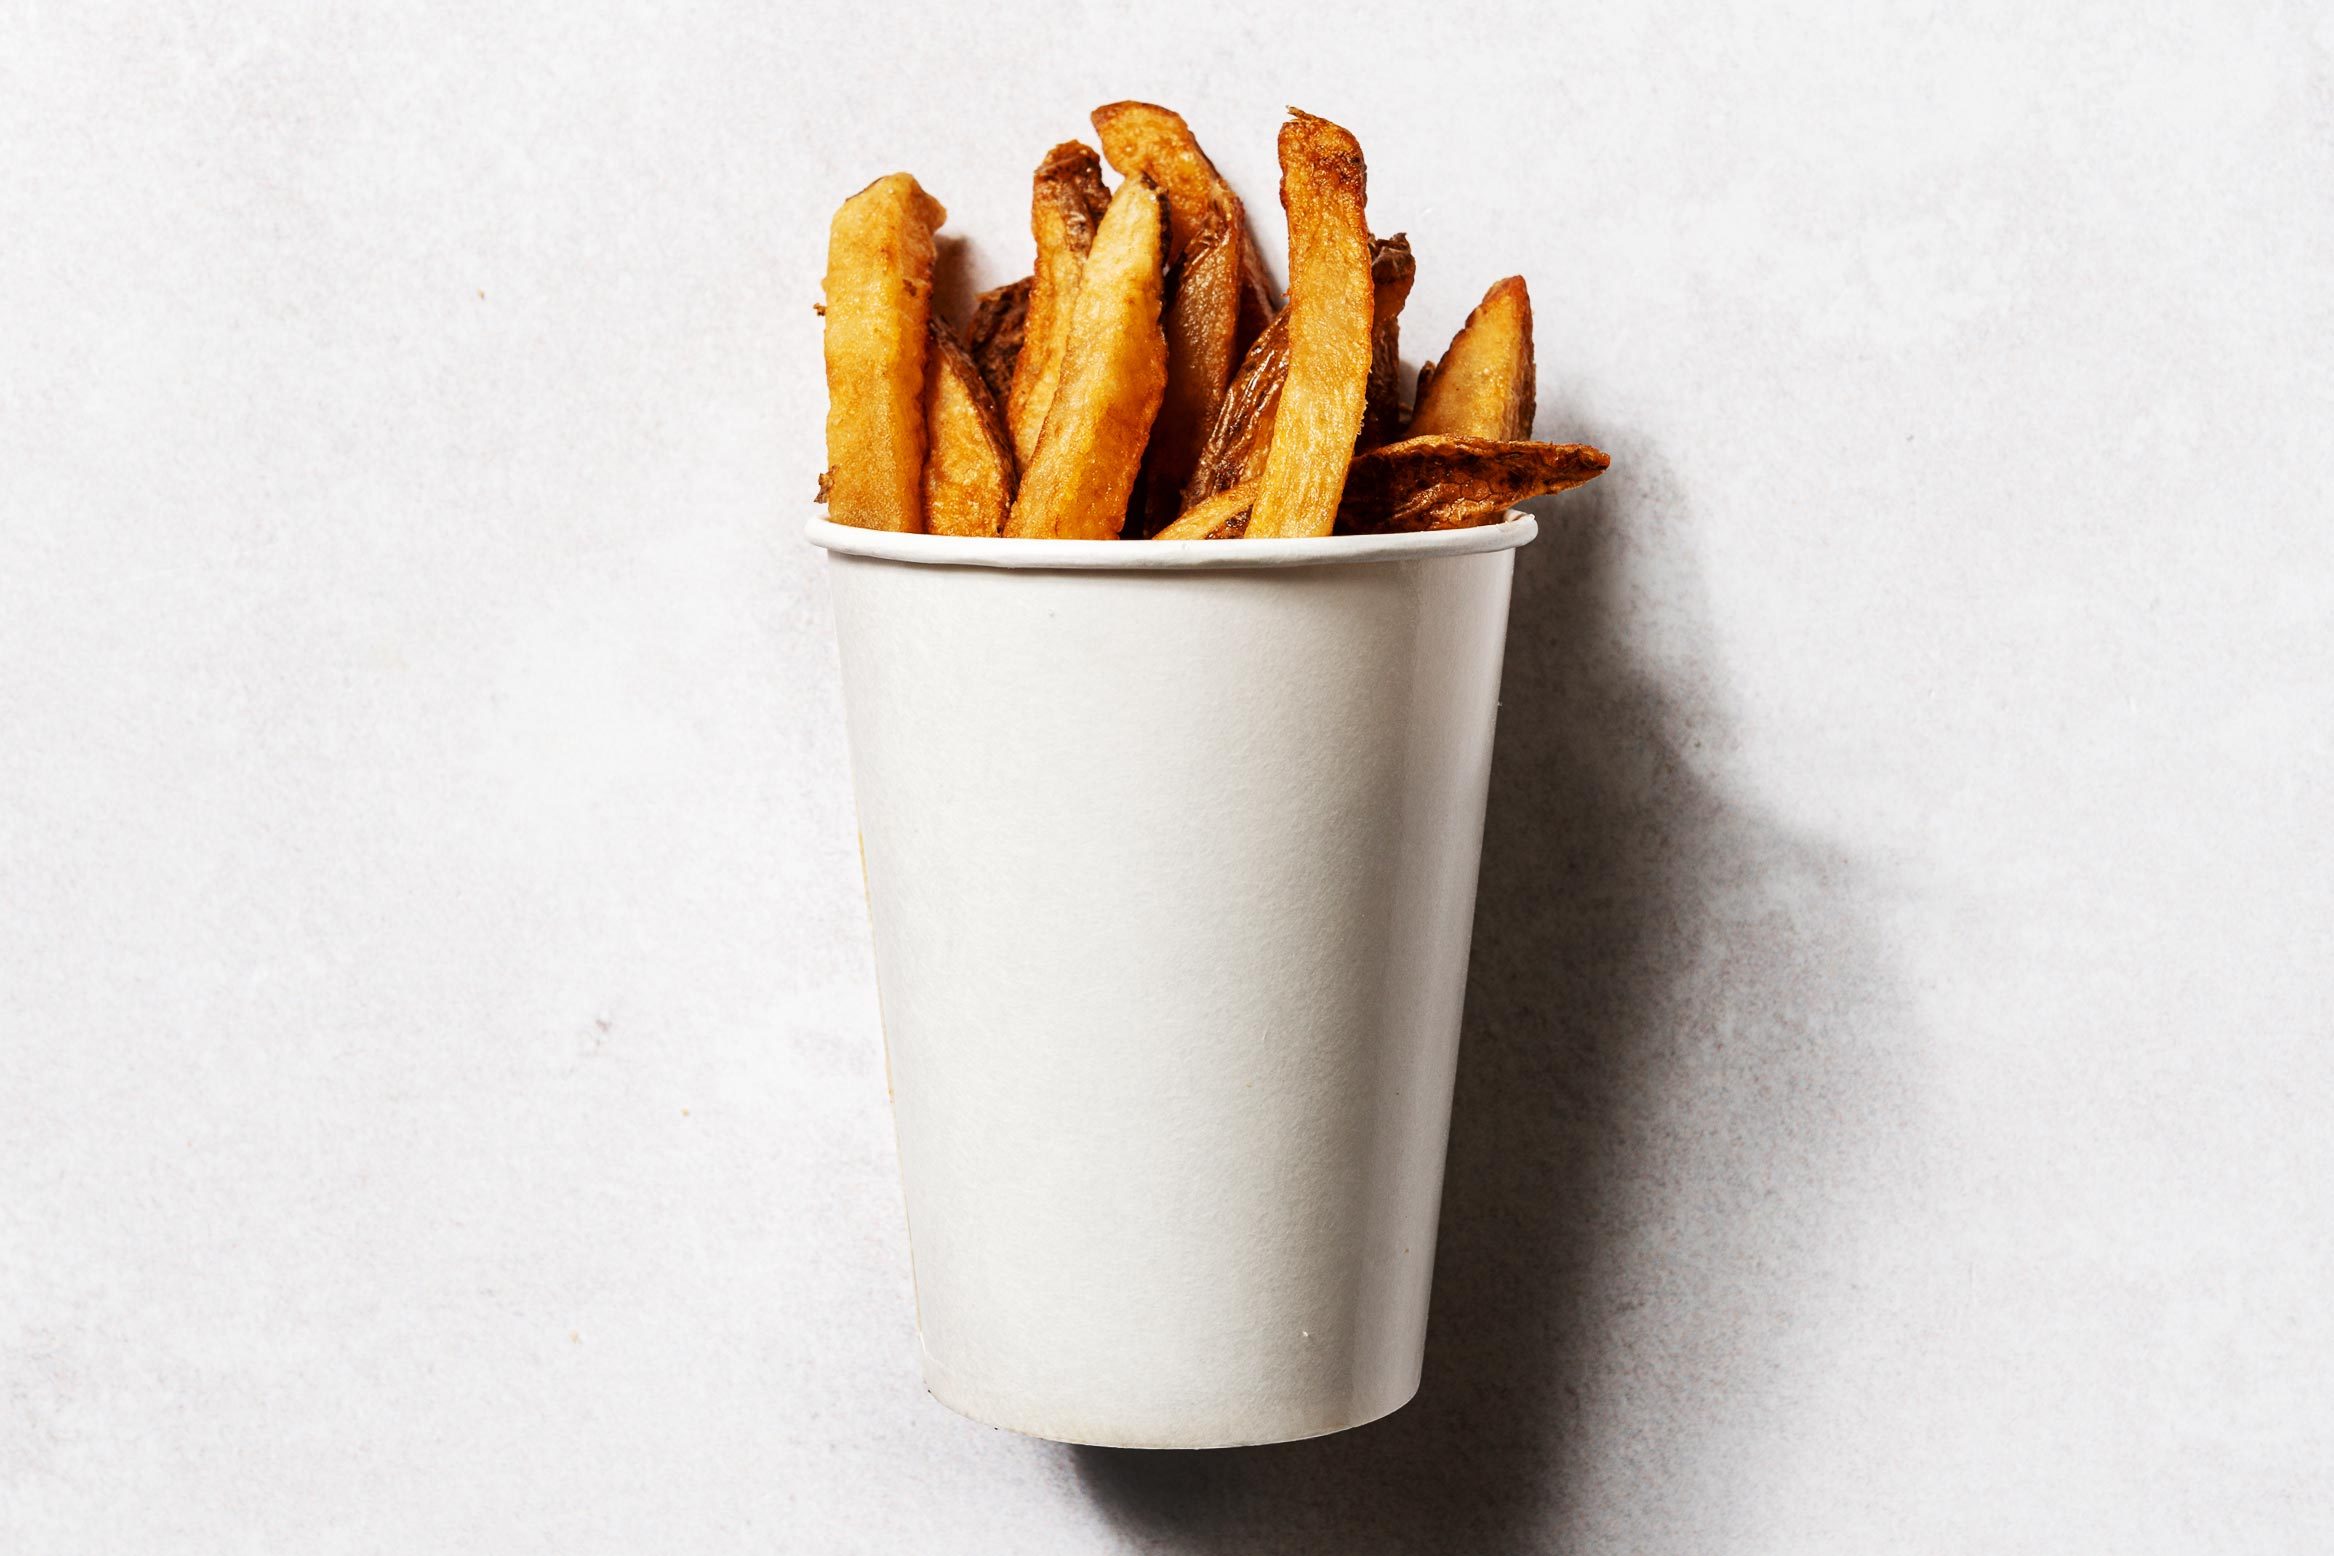 Review]The 15 Best Fast Food French Fries Of All Time, Ranked : r